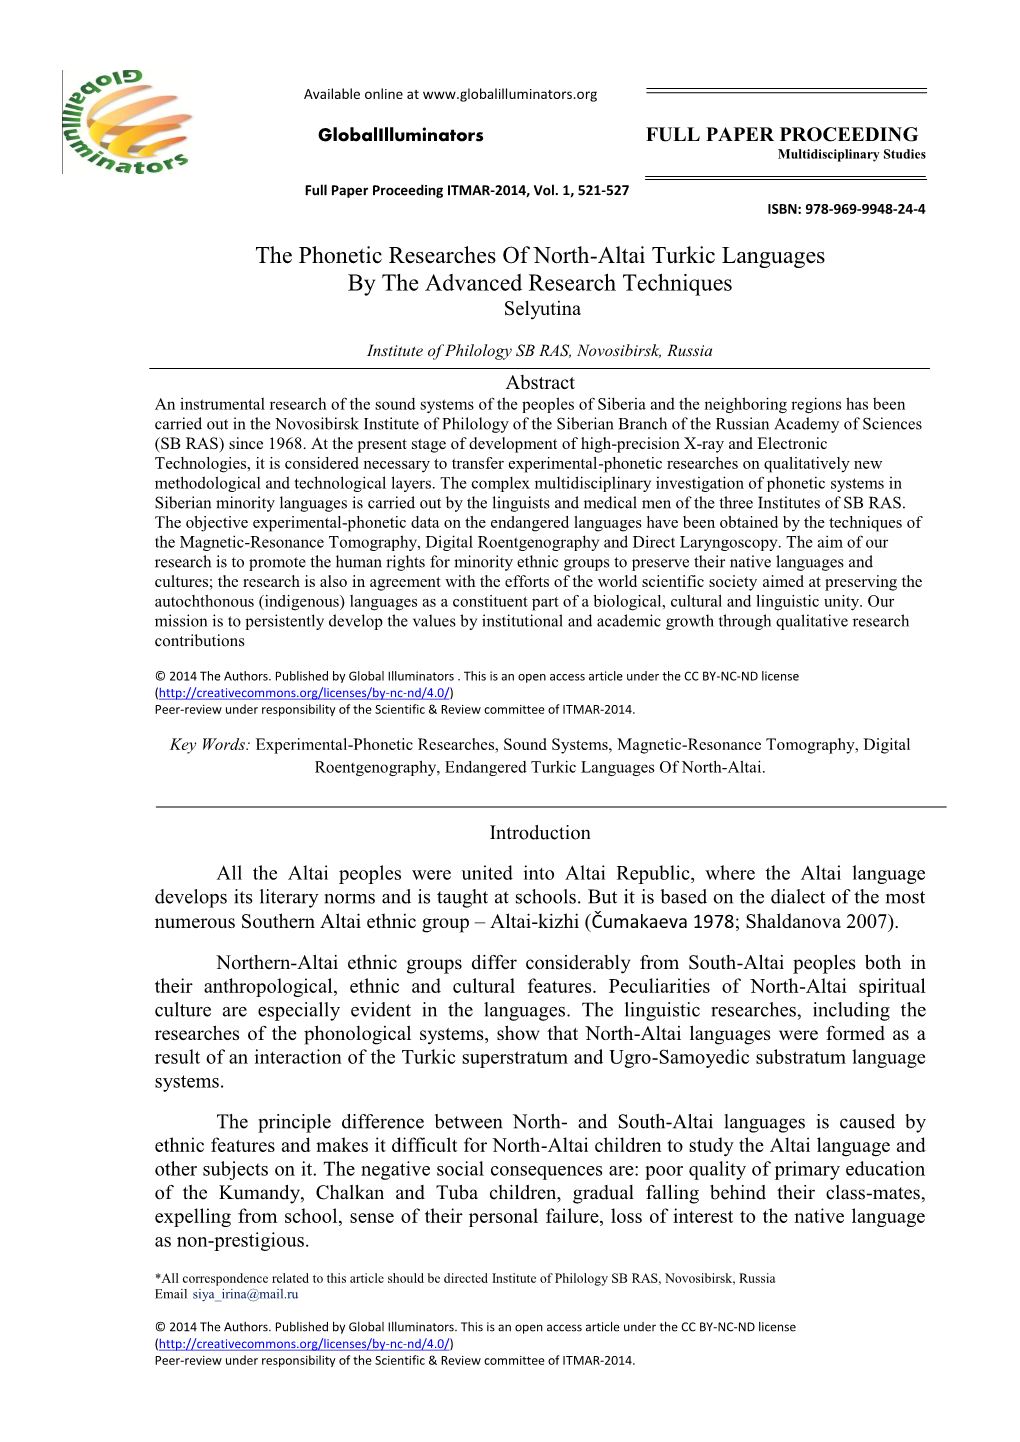 The Phonetic Researches of North-Altai Turkic Languages by the Advanced Research Techniques Selyutina